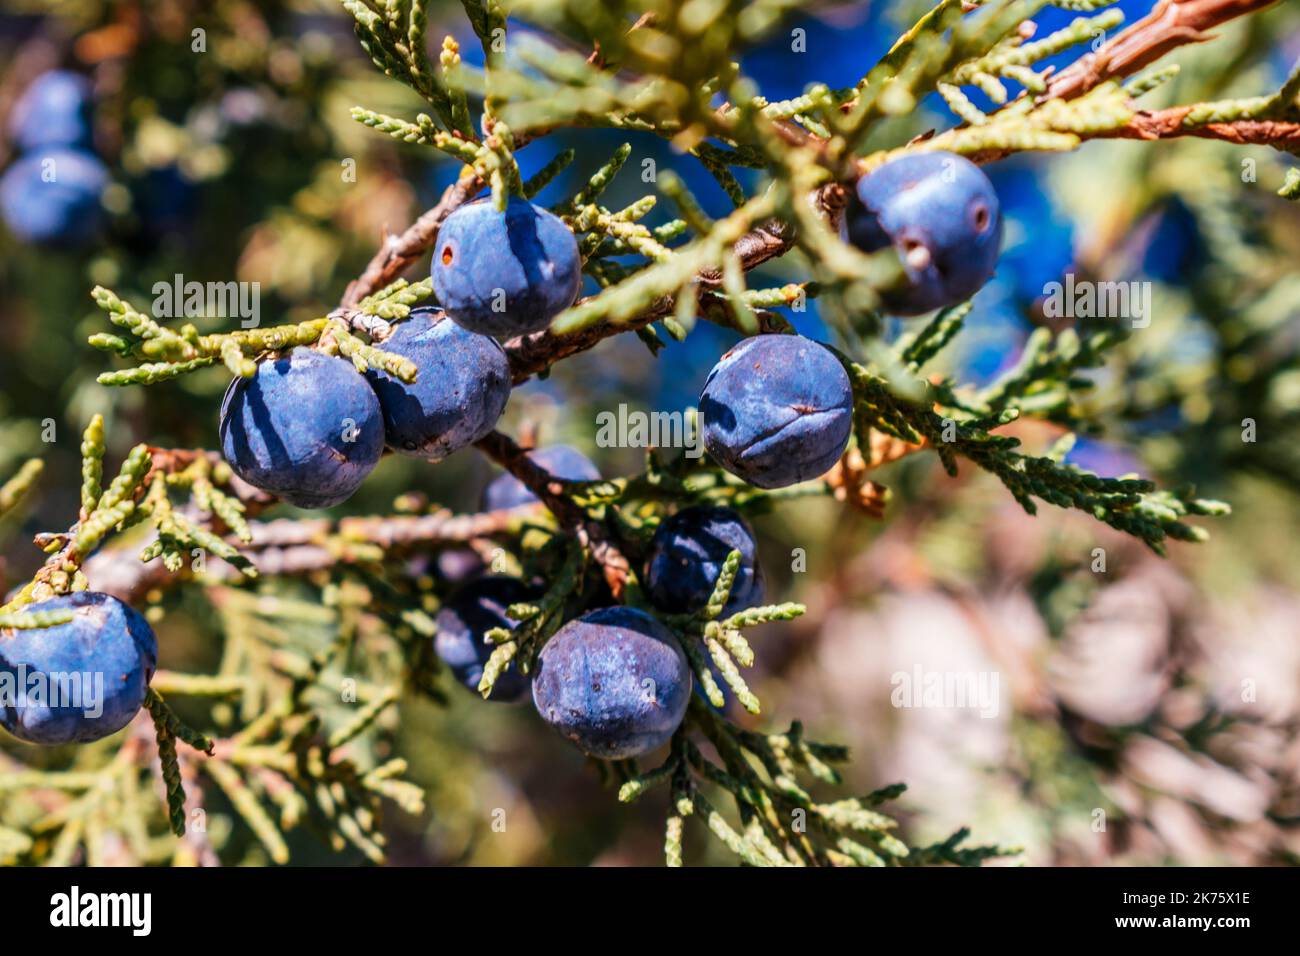 Twigs with berries. Juniperus thurifera, Spanish juniper, is a species of juniper native to the mountains of the western Mediterranean region. Guadala Stock Photo